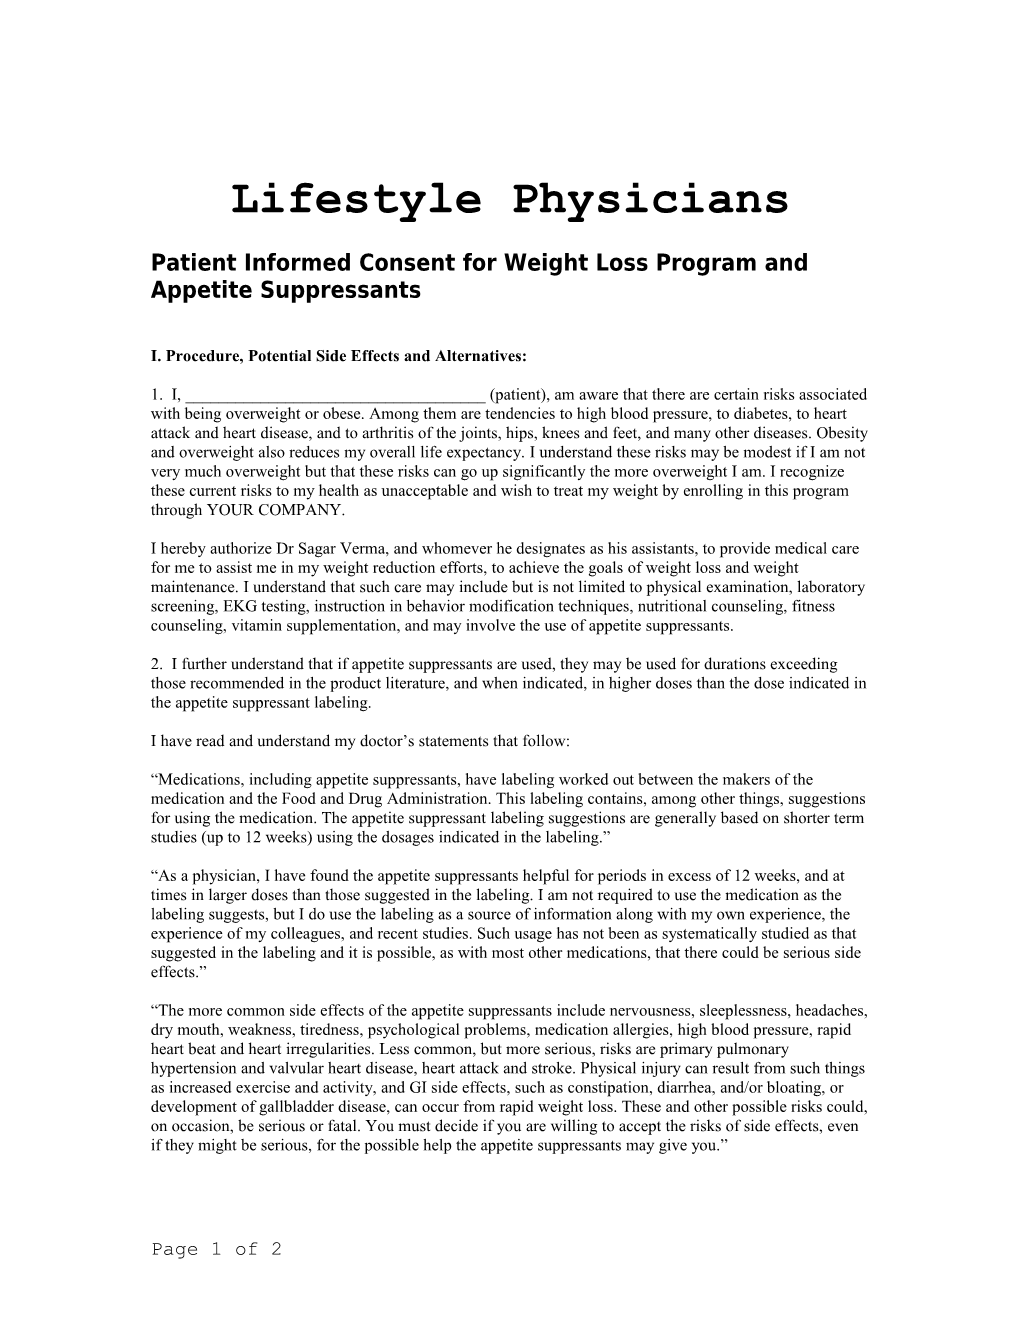 Patient Informed Consent for Weight Loss Program and Appetite Suppressants